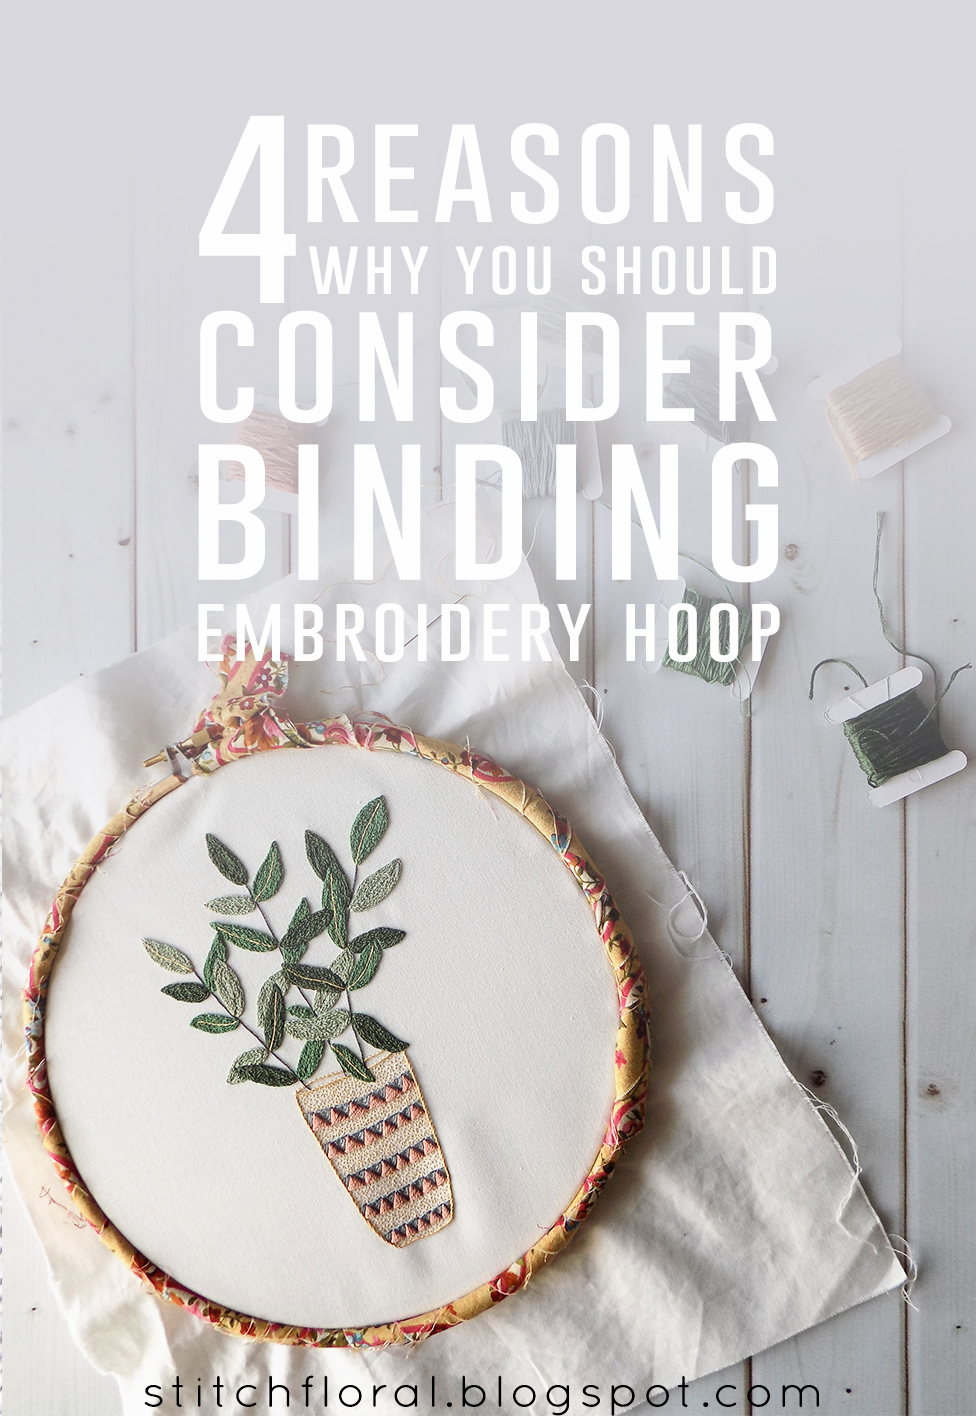 4 reasons why you should consider binding embroidery hoop - Stitch